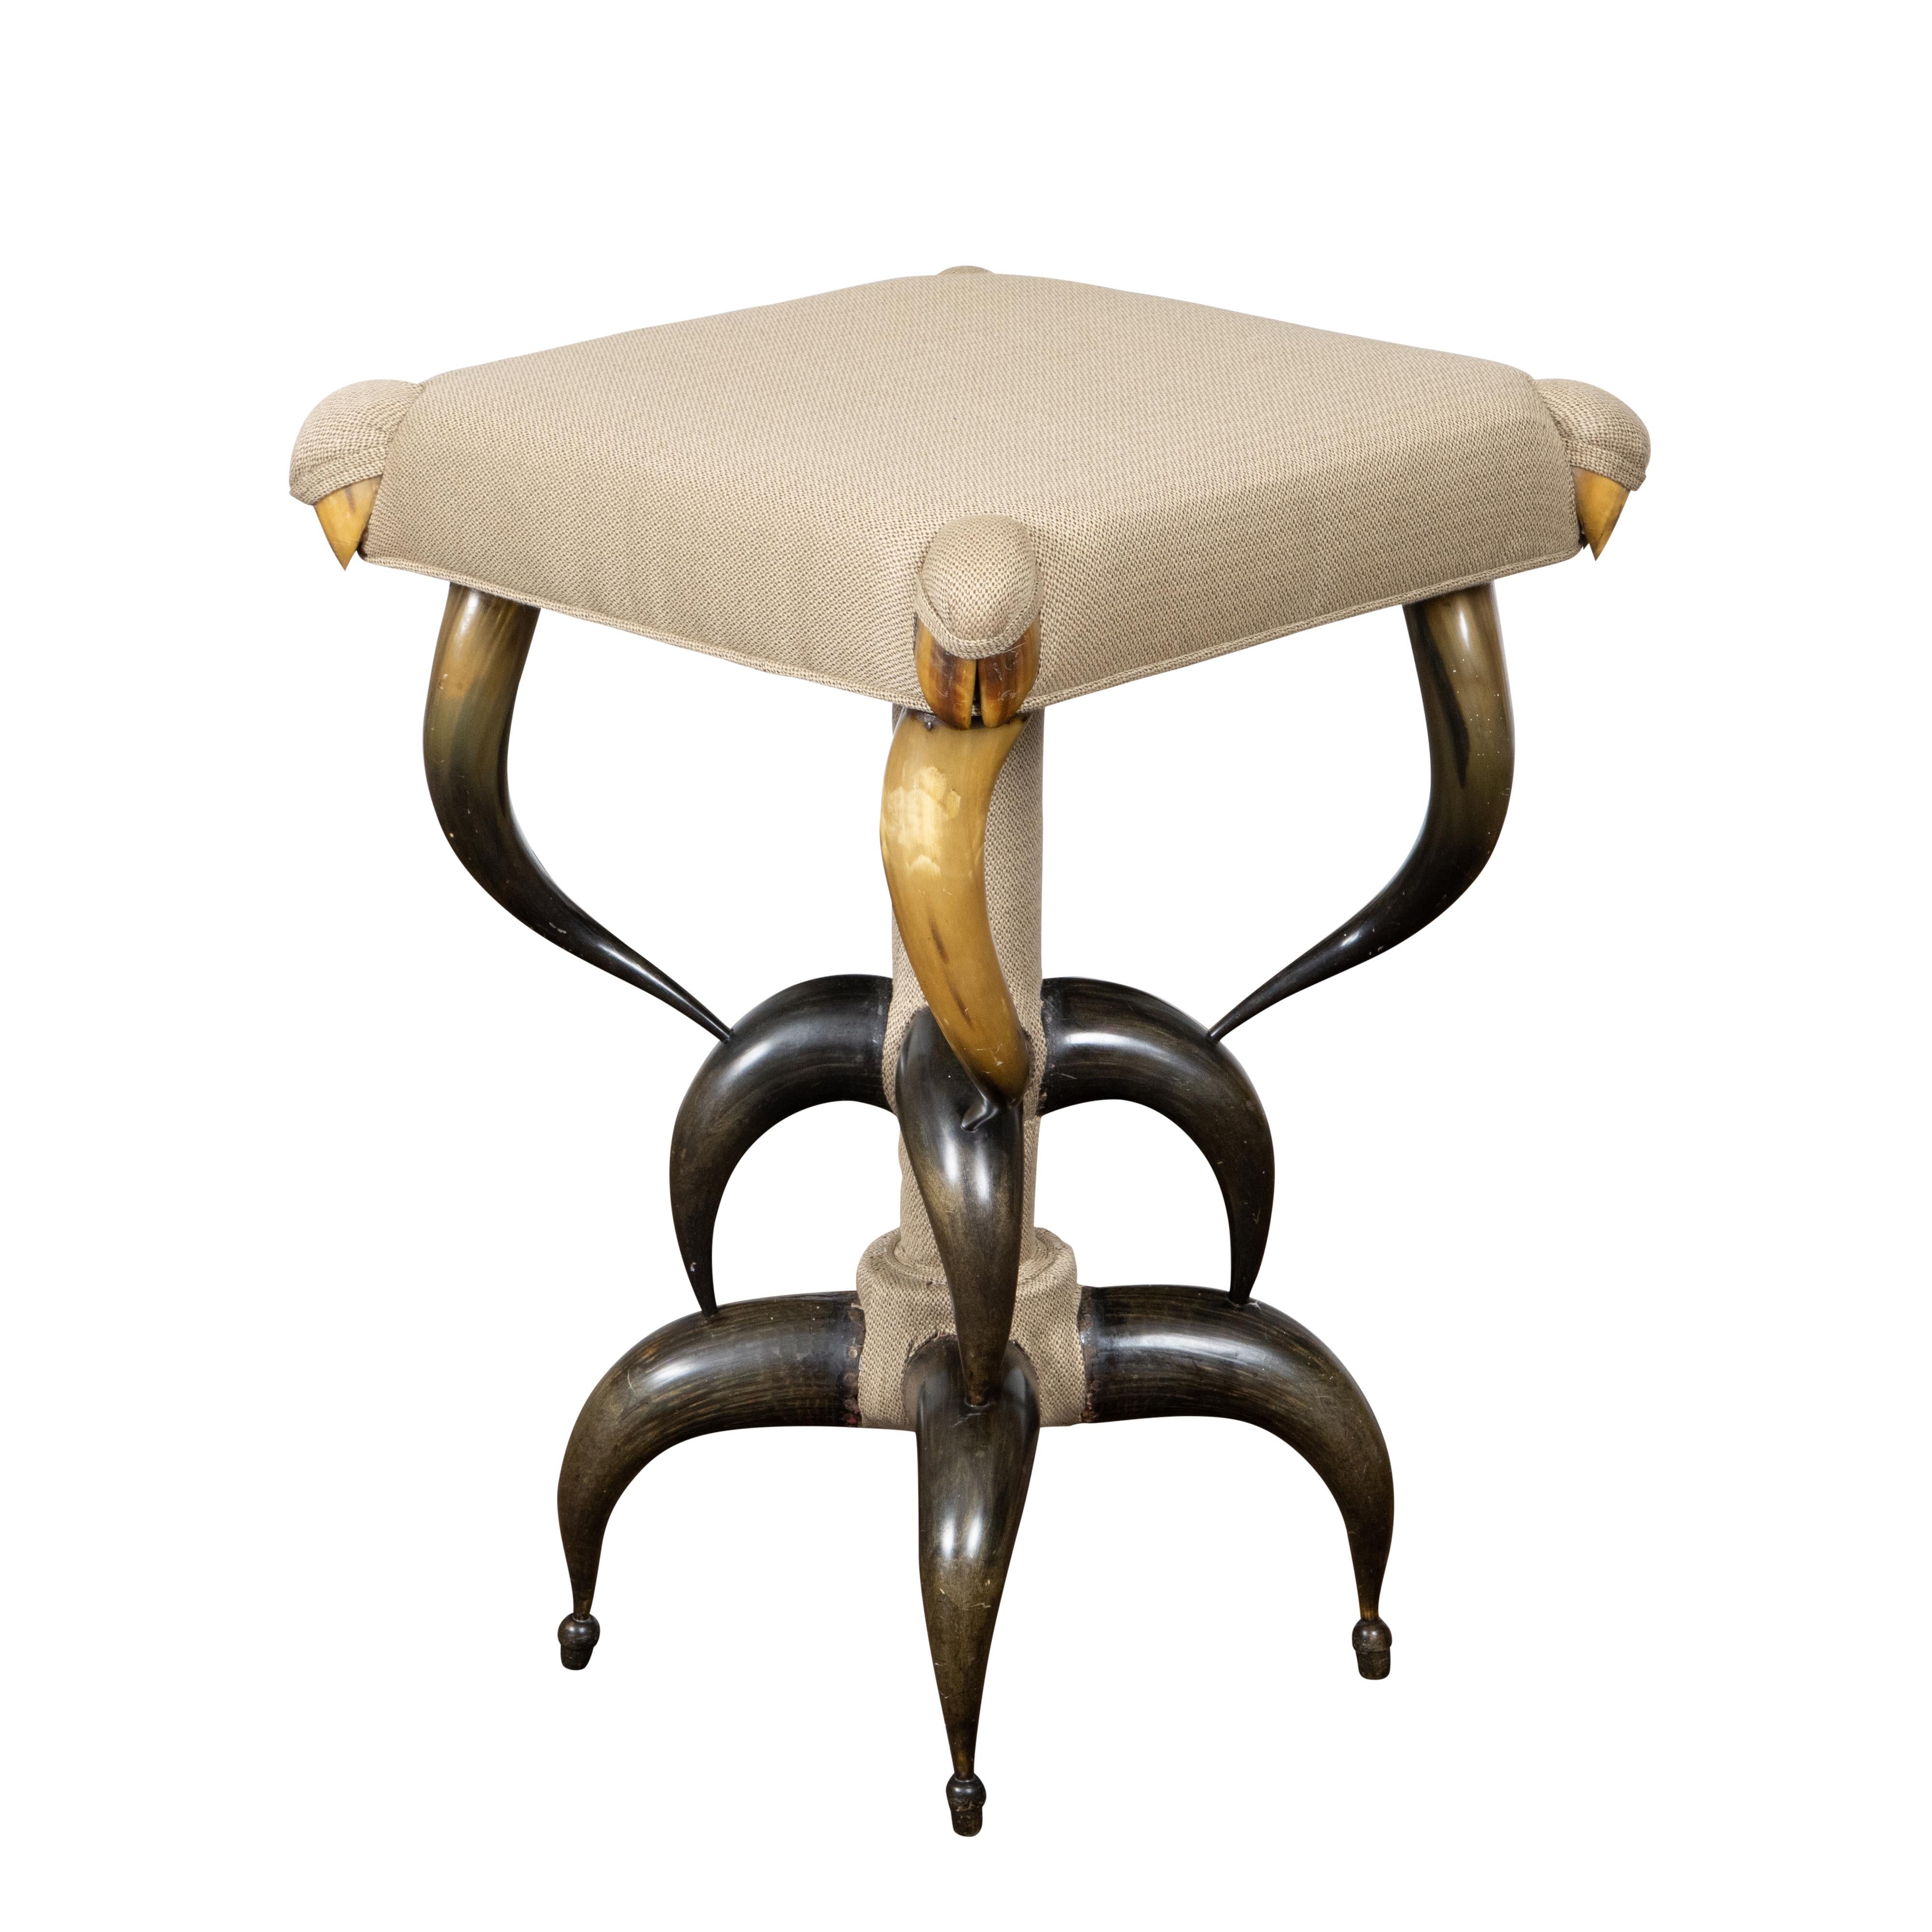 1880s American Horn Stool with Three-Tier Construction and Custom Upholstery For Sale 1